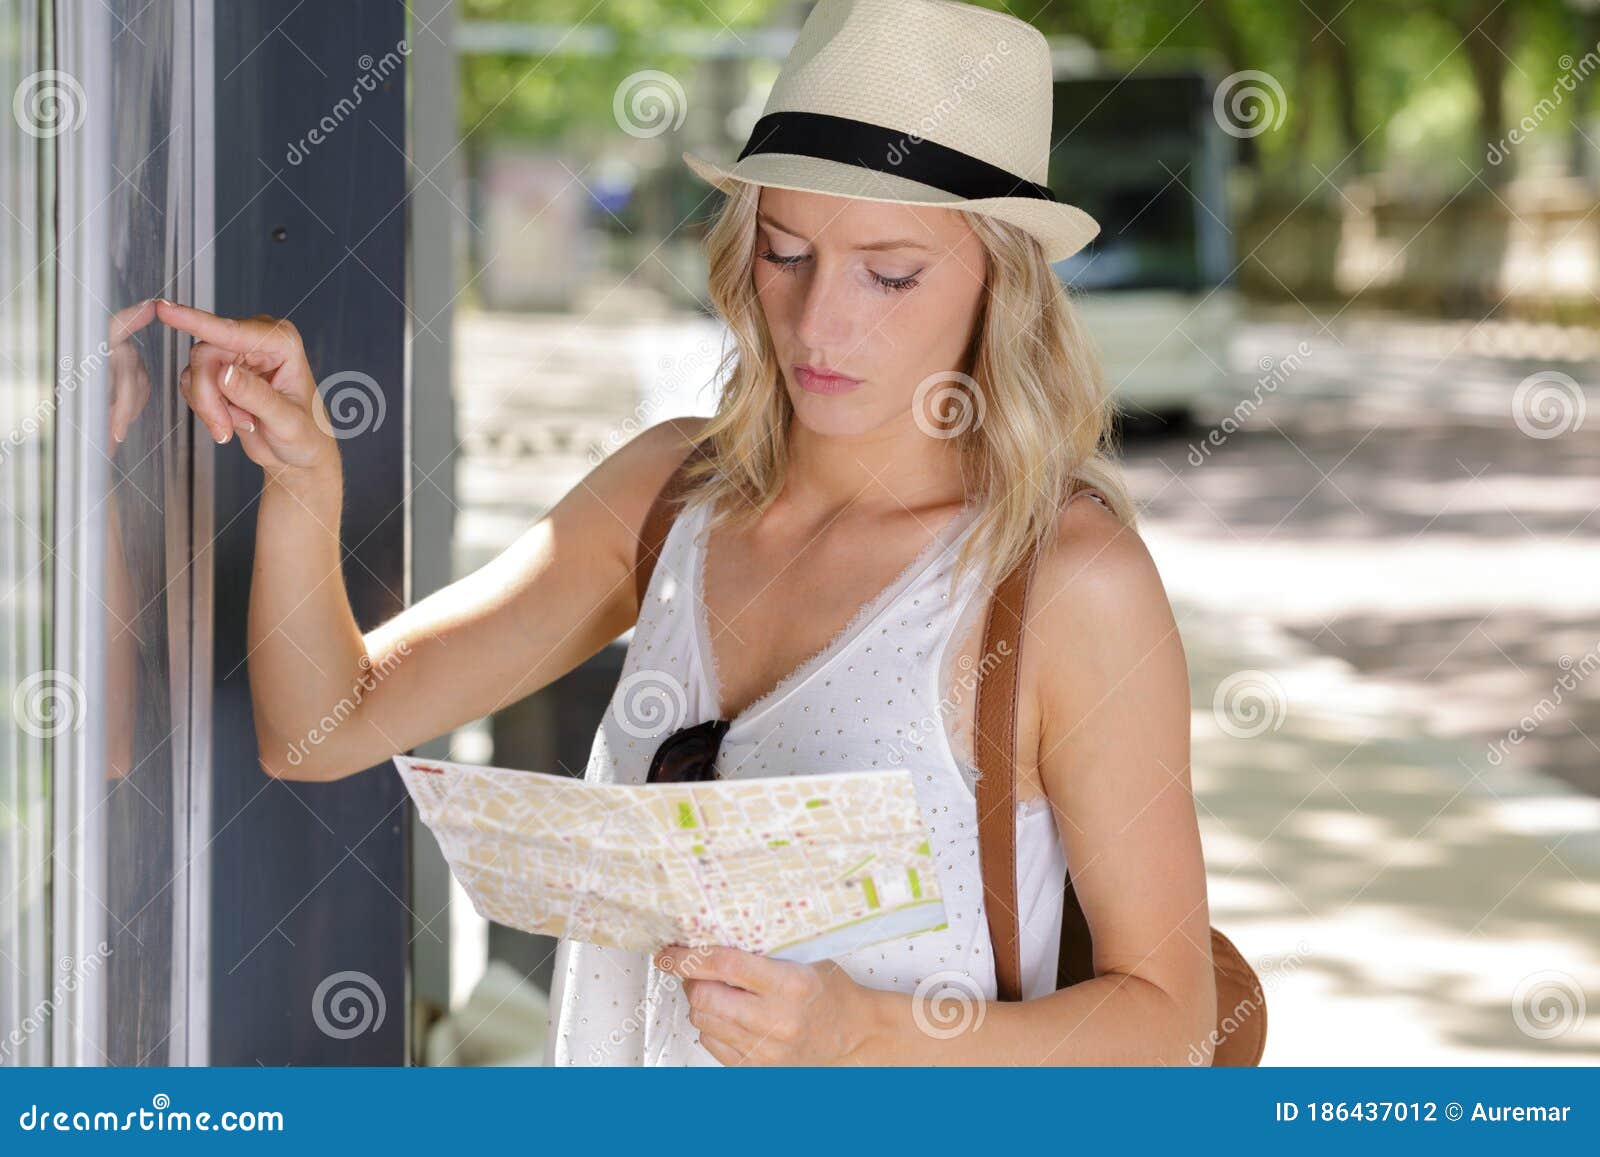 smiling woman studying route map